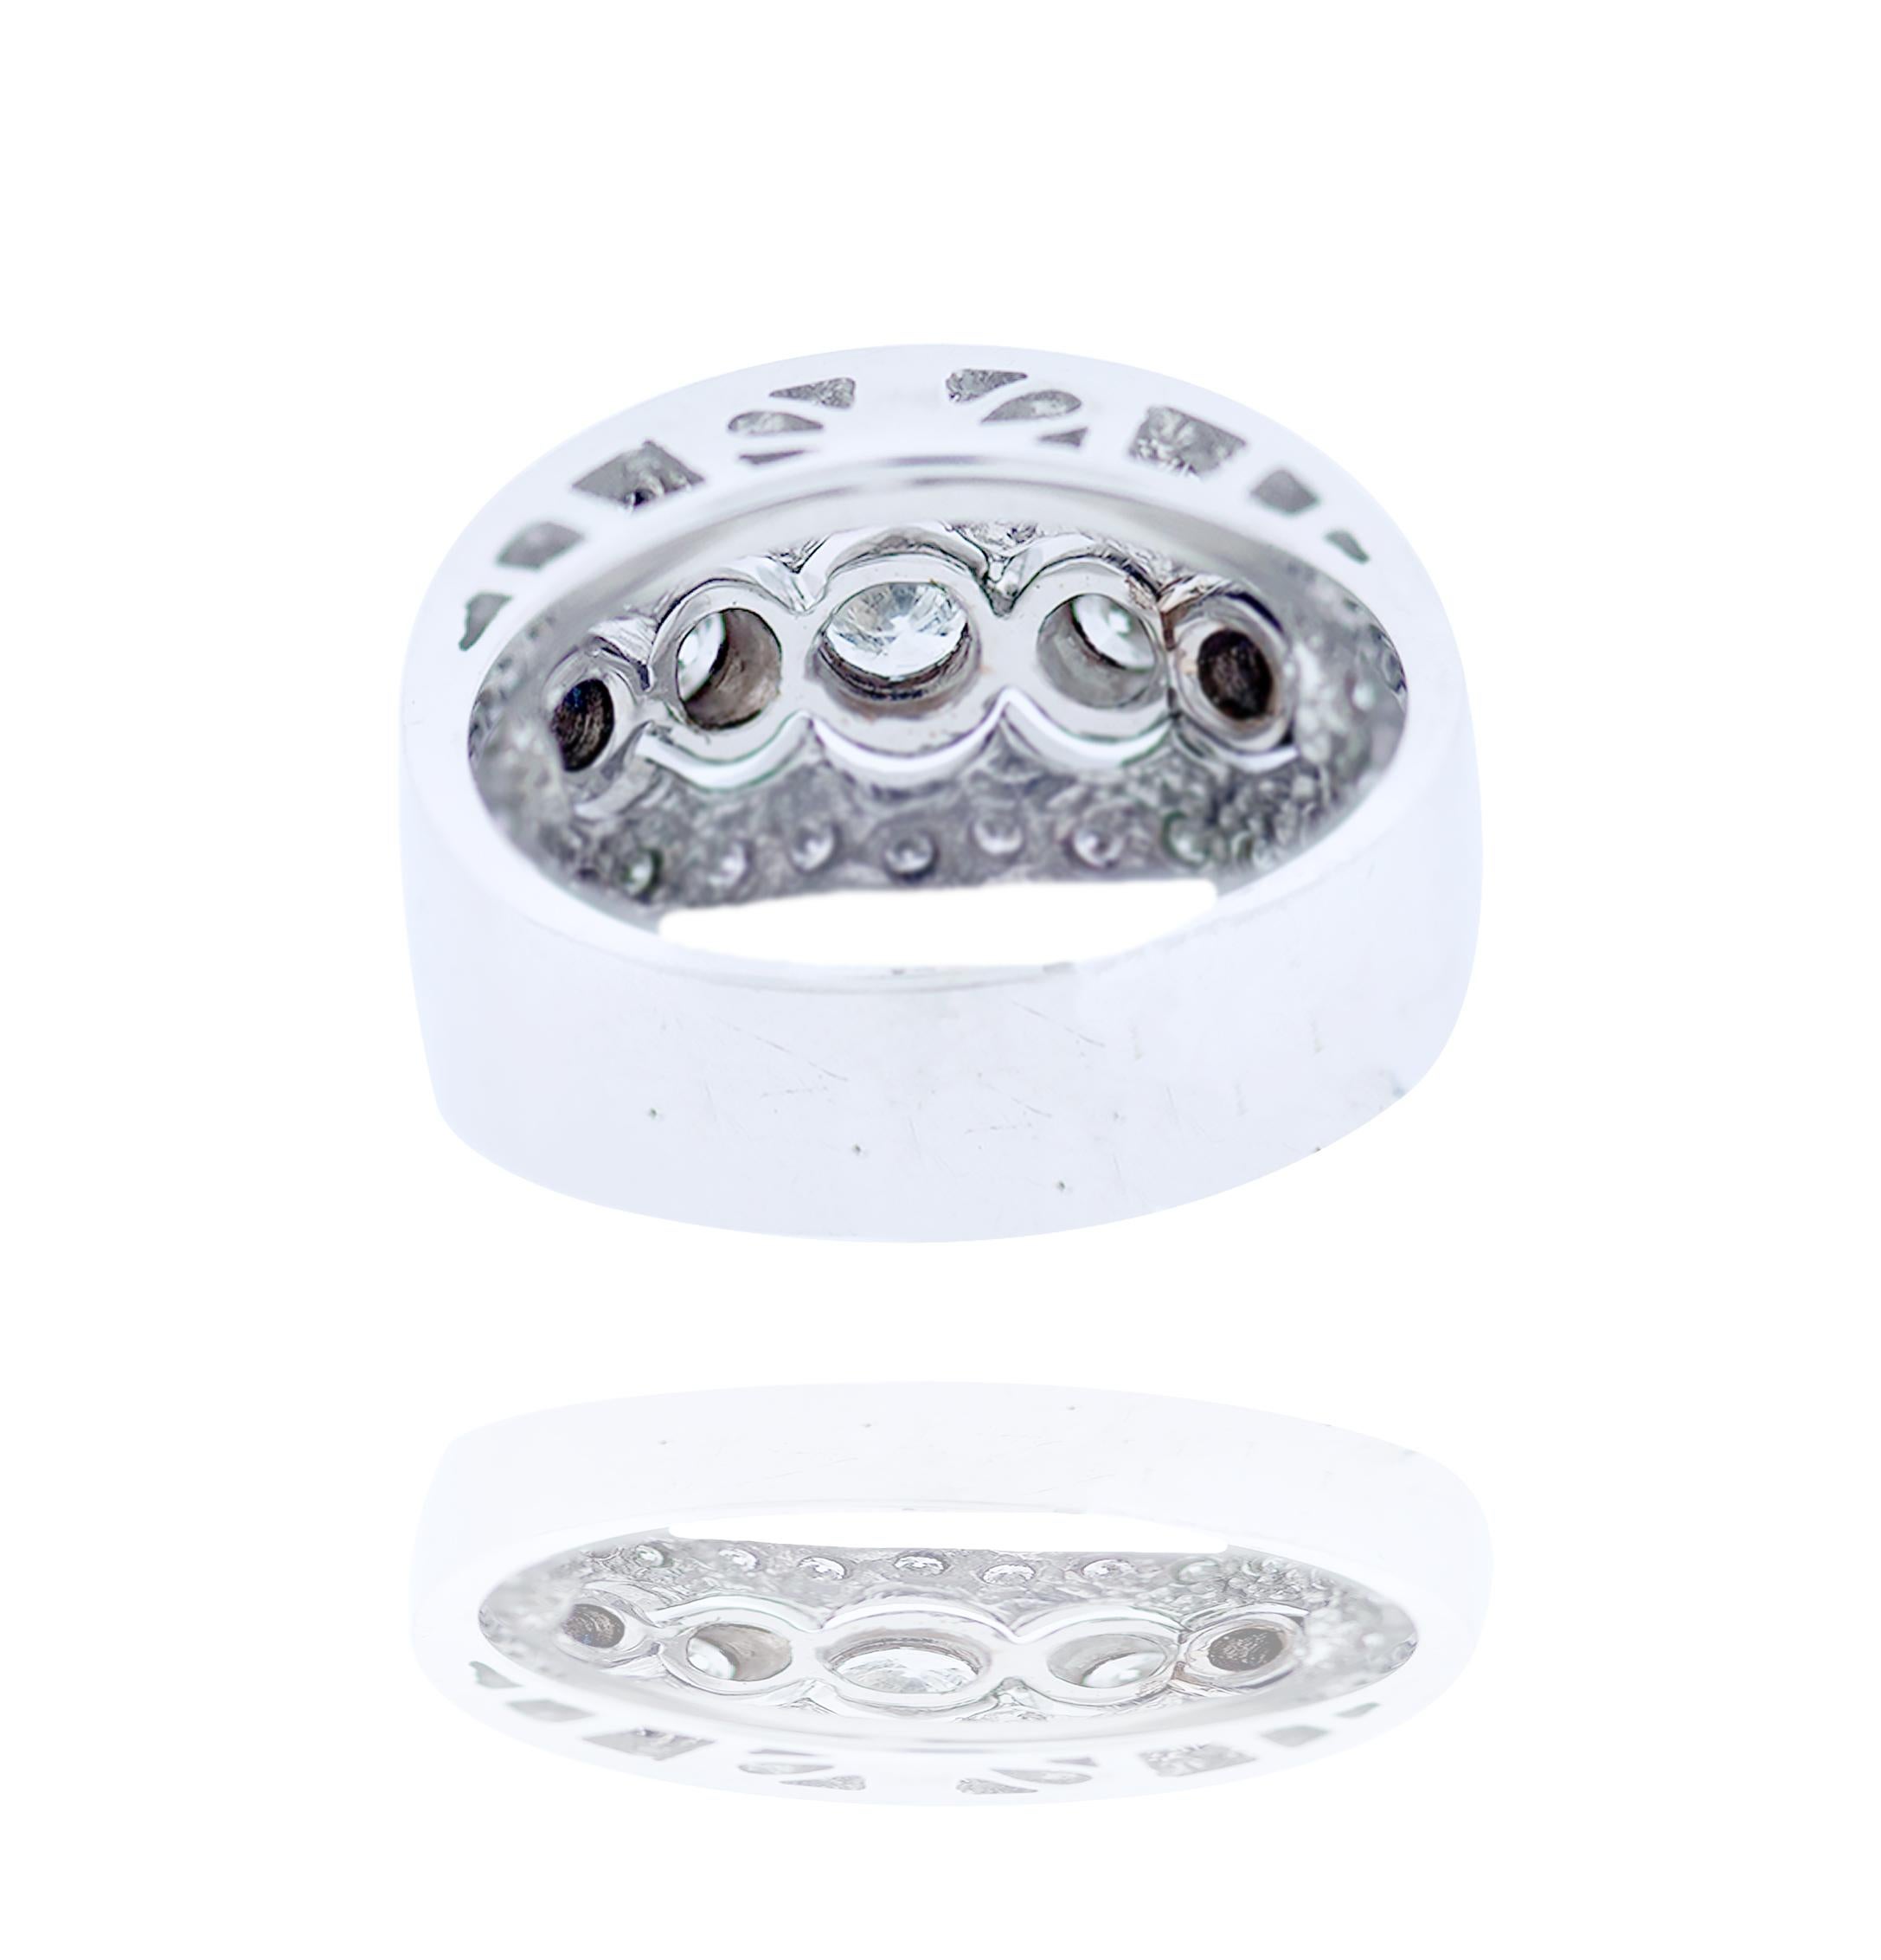 PAVE, 5- Stone Bezel Diamond, 11.50 mm Band Ring
Graduated diamonds encompassed a total weight f .96 carat. Quality are Si1 clarity and H color. Weight is 8.4 grams. Ring size is 6.75 
GIA Gemologist Appraised and Evaluated